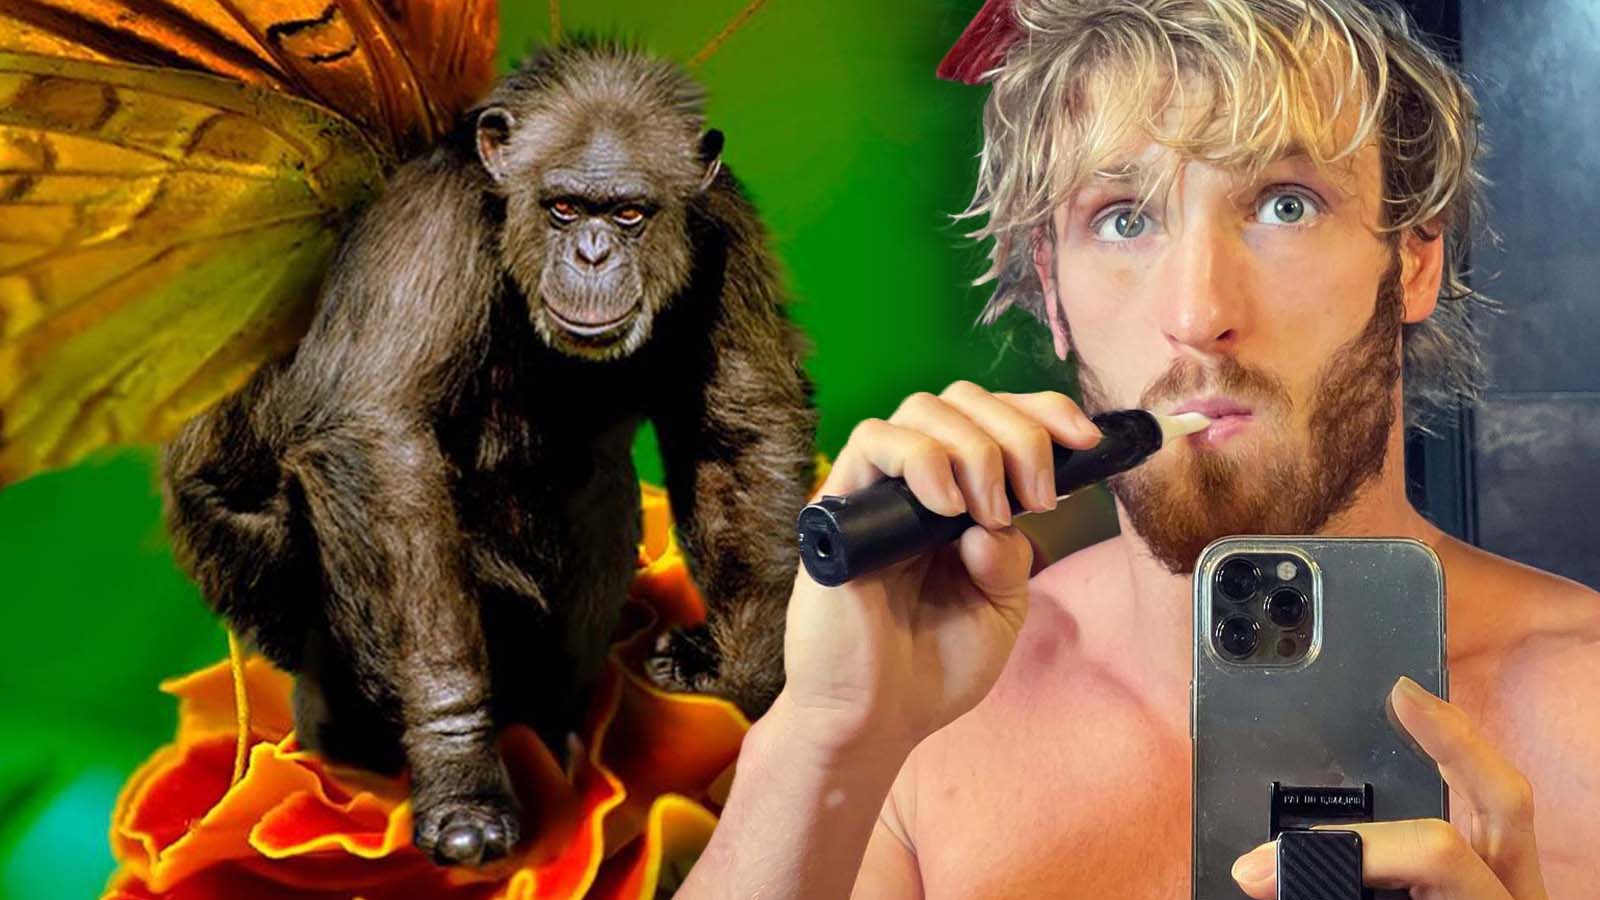 Logan Paul under fire for stealing Adobe Stock images in new NFT 'scam